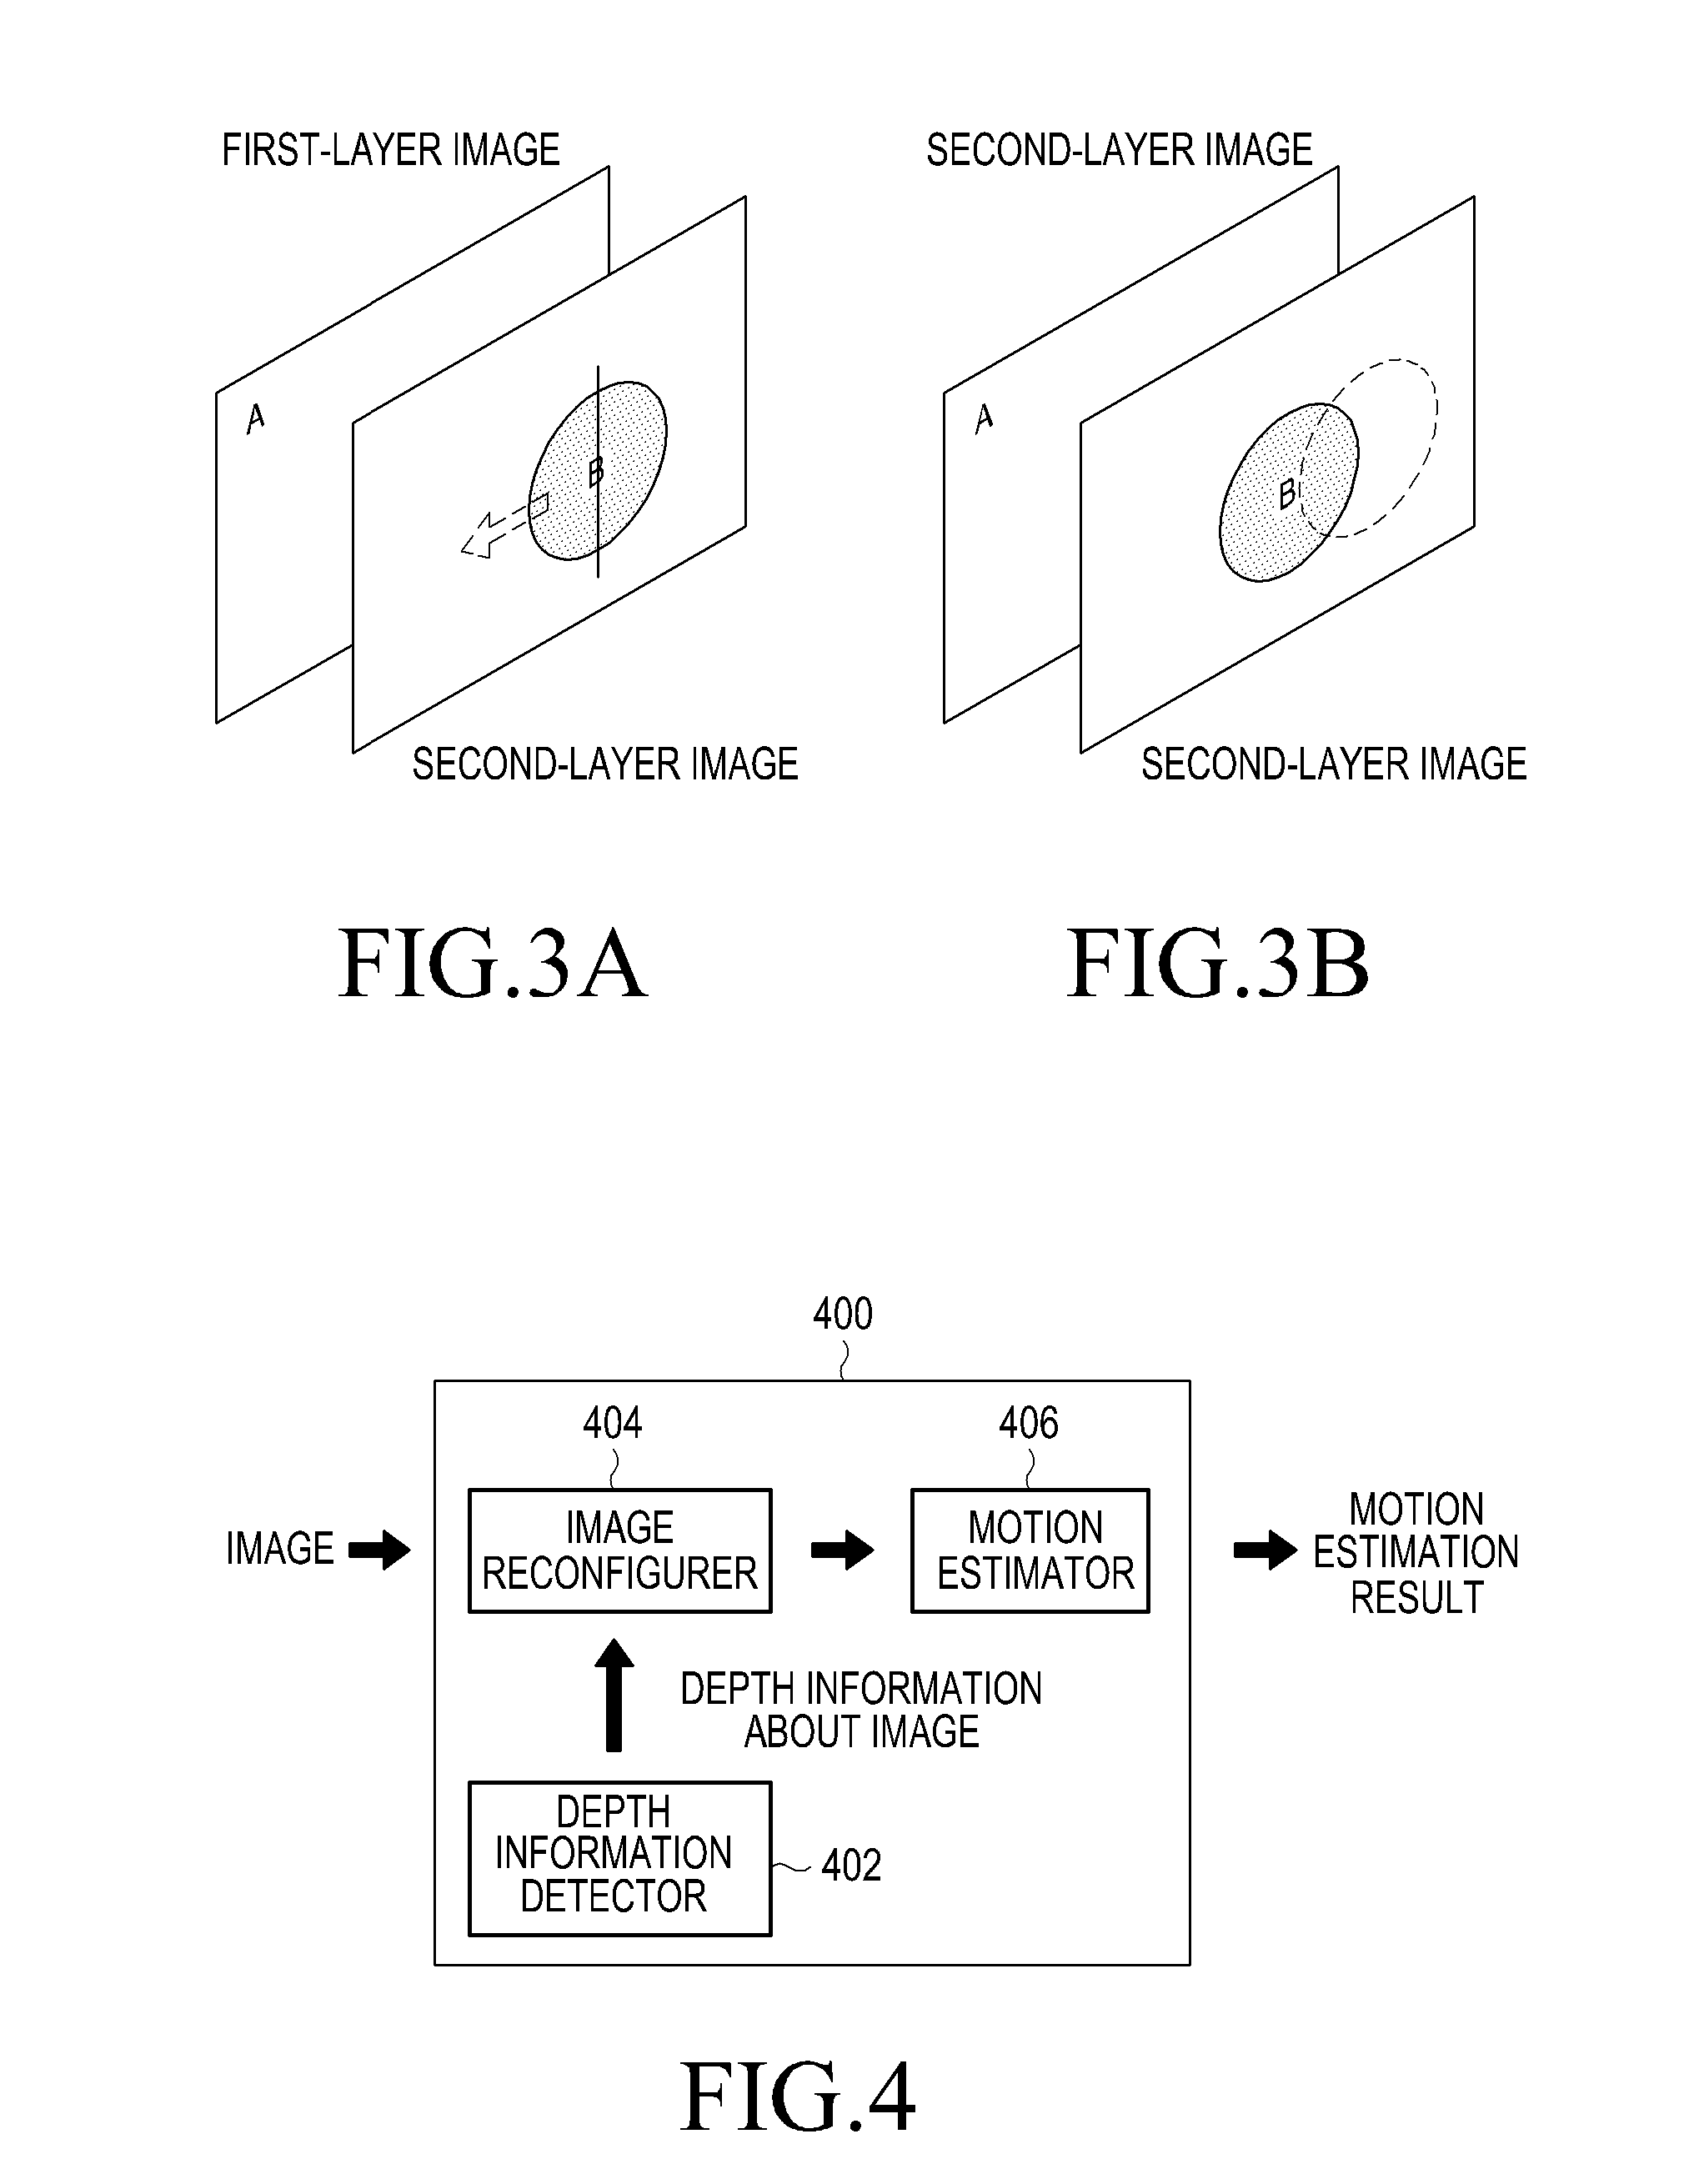 Apparatus and method for motion estimation in an image processing system